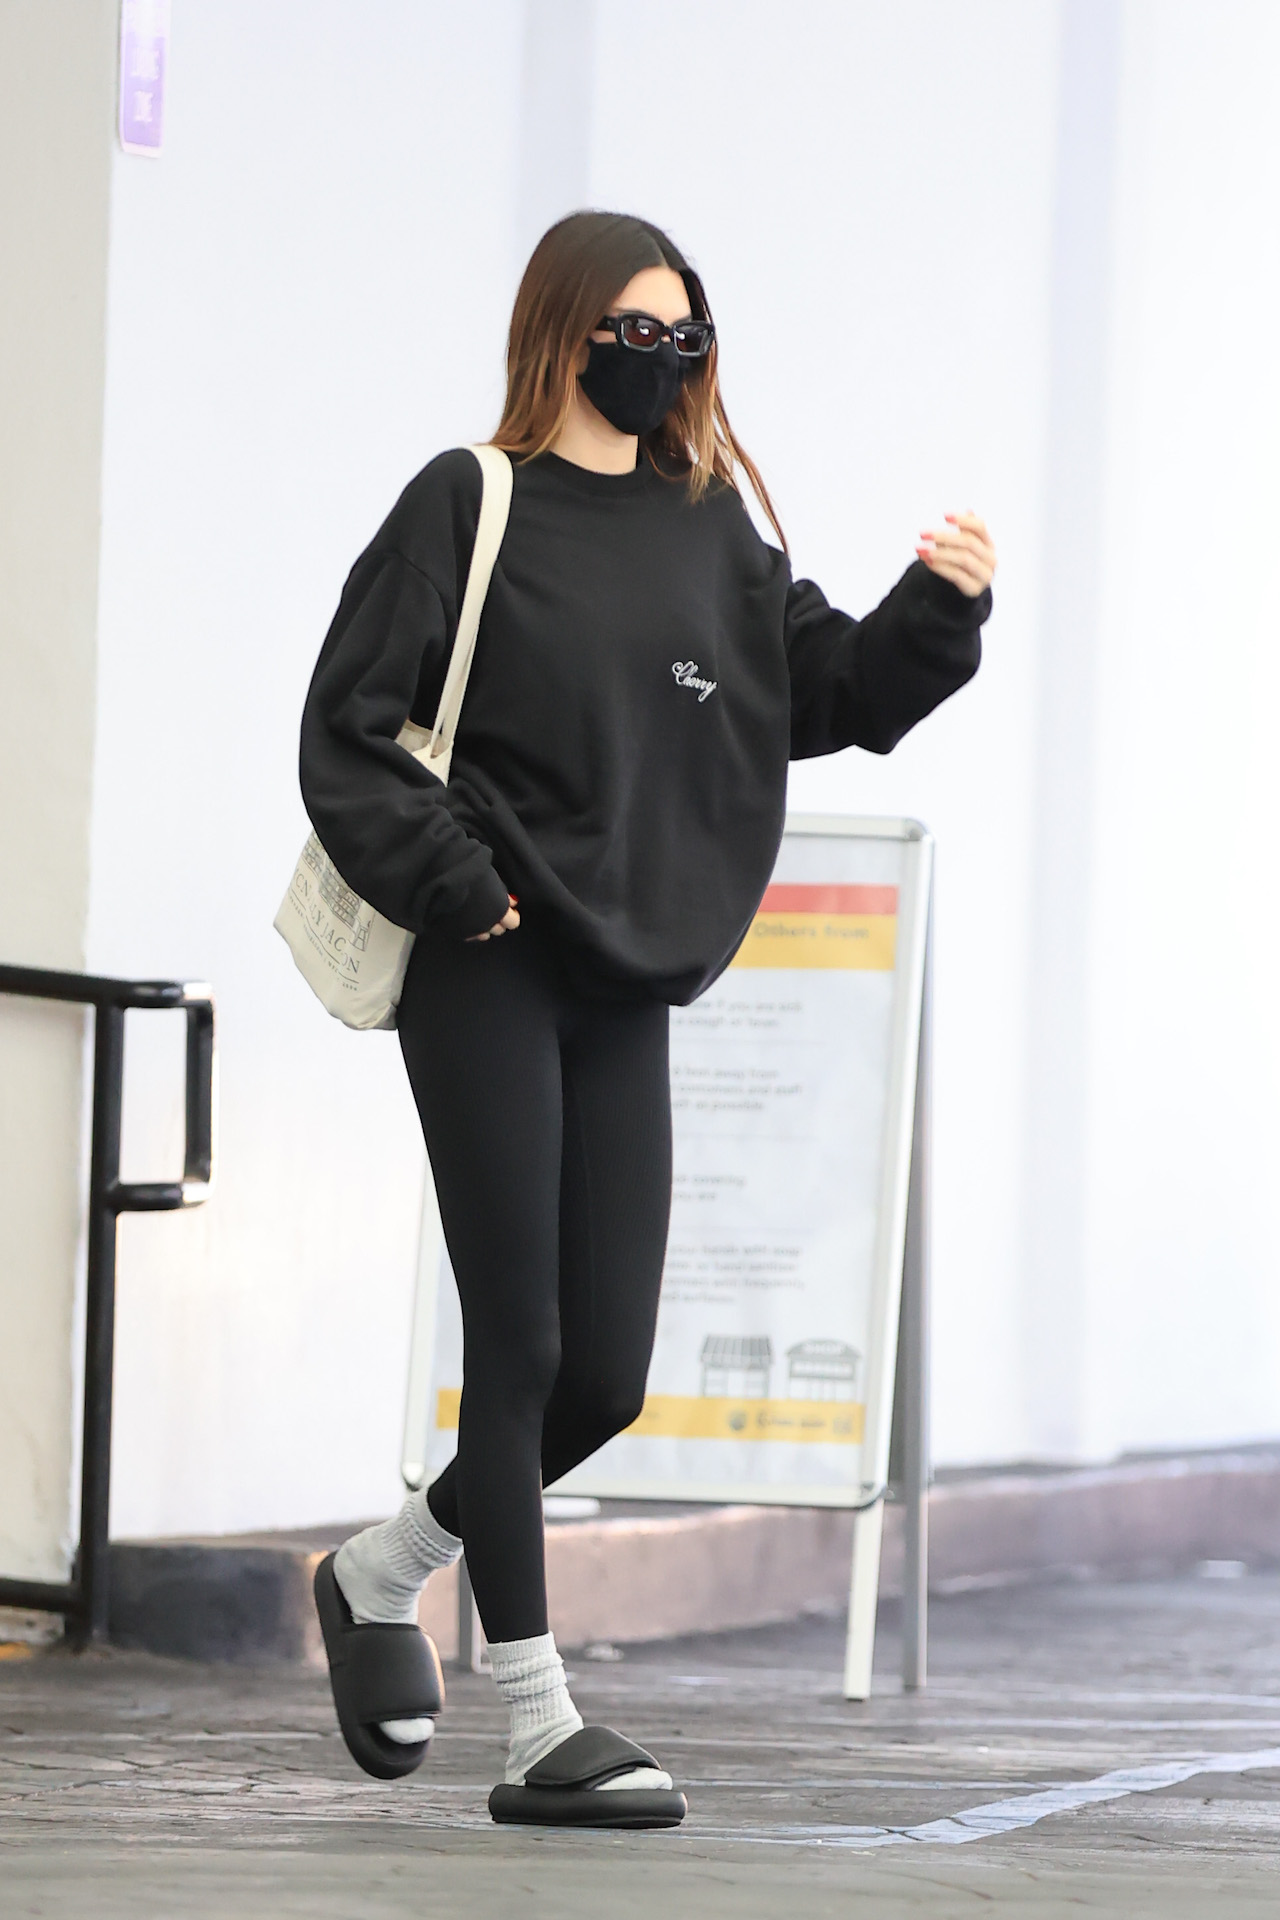 Kendall Jenner Wore Adidas Yeezy Slides in Los Angeles